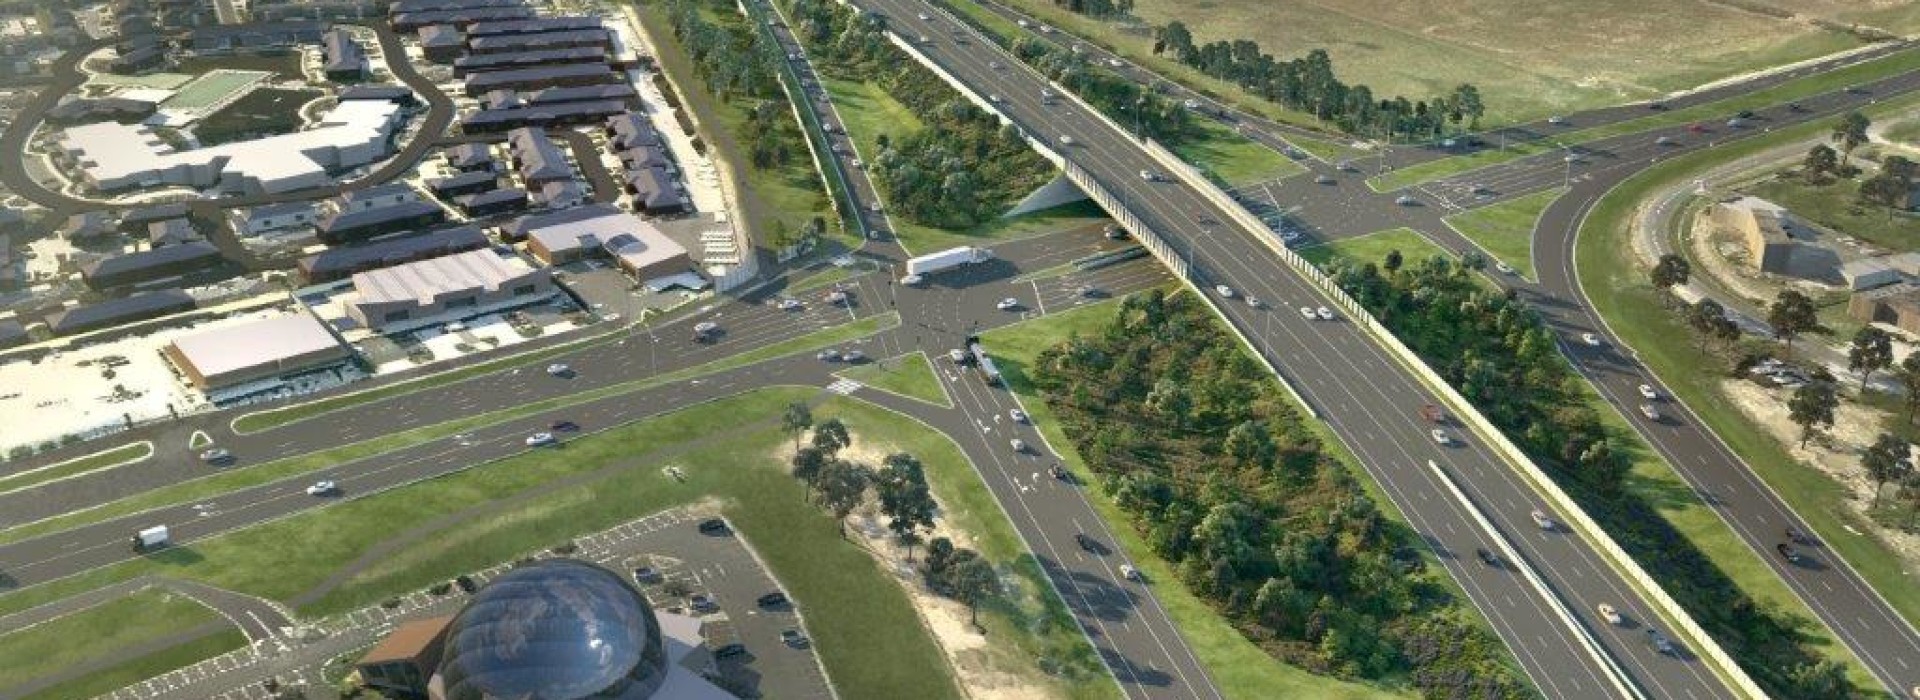 McConnell Dowell Decmil Joint Venture Awarded Contract to Build the Mordialloc Freeway 